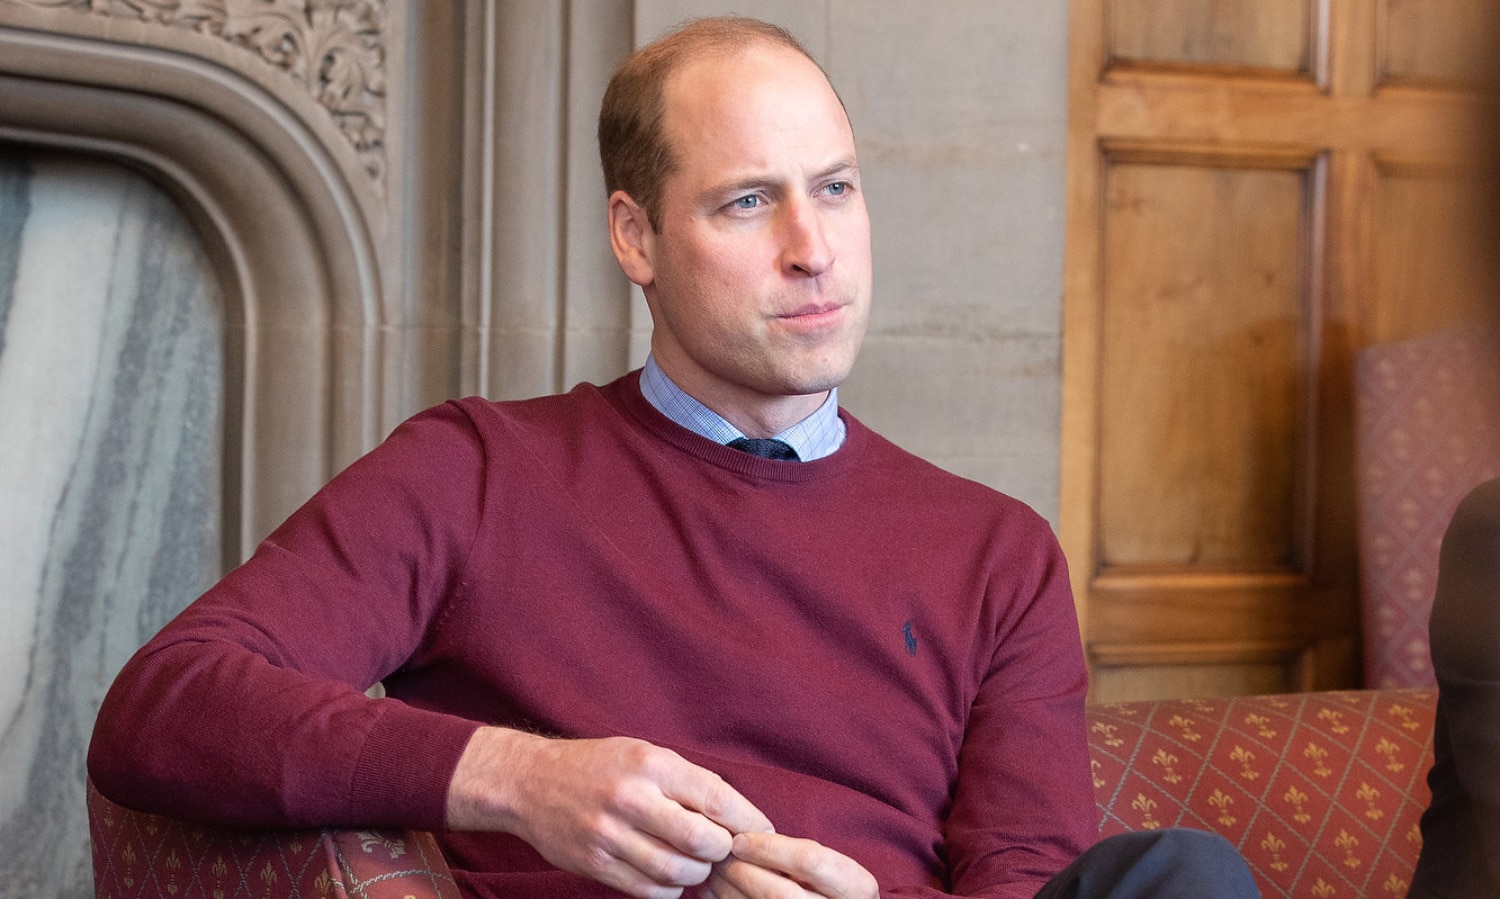 The Bizarre Way Prince William Deals With Anxiety